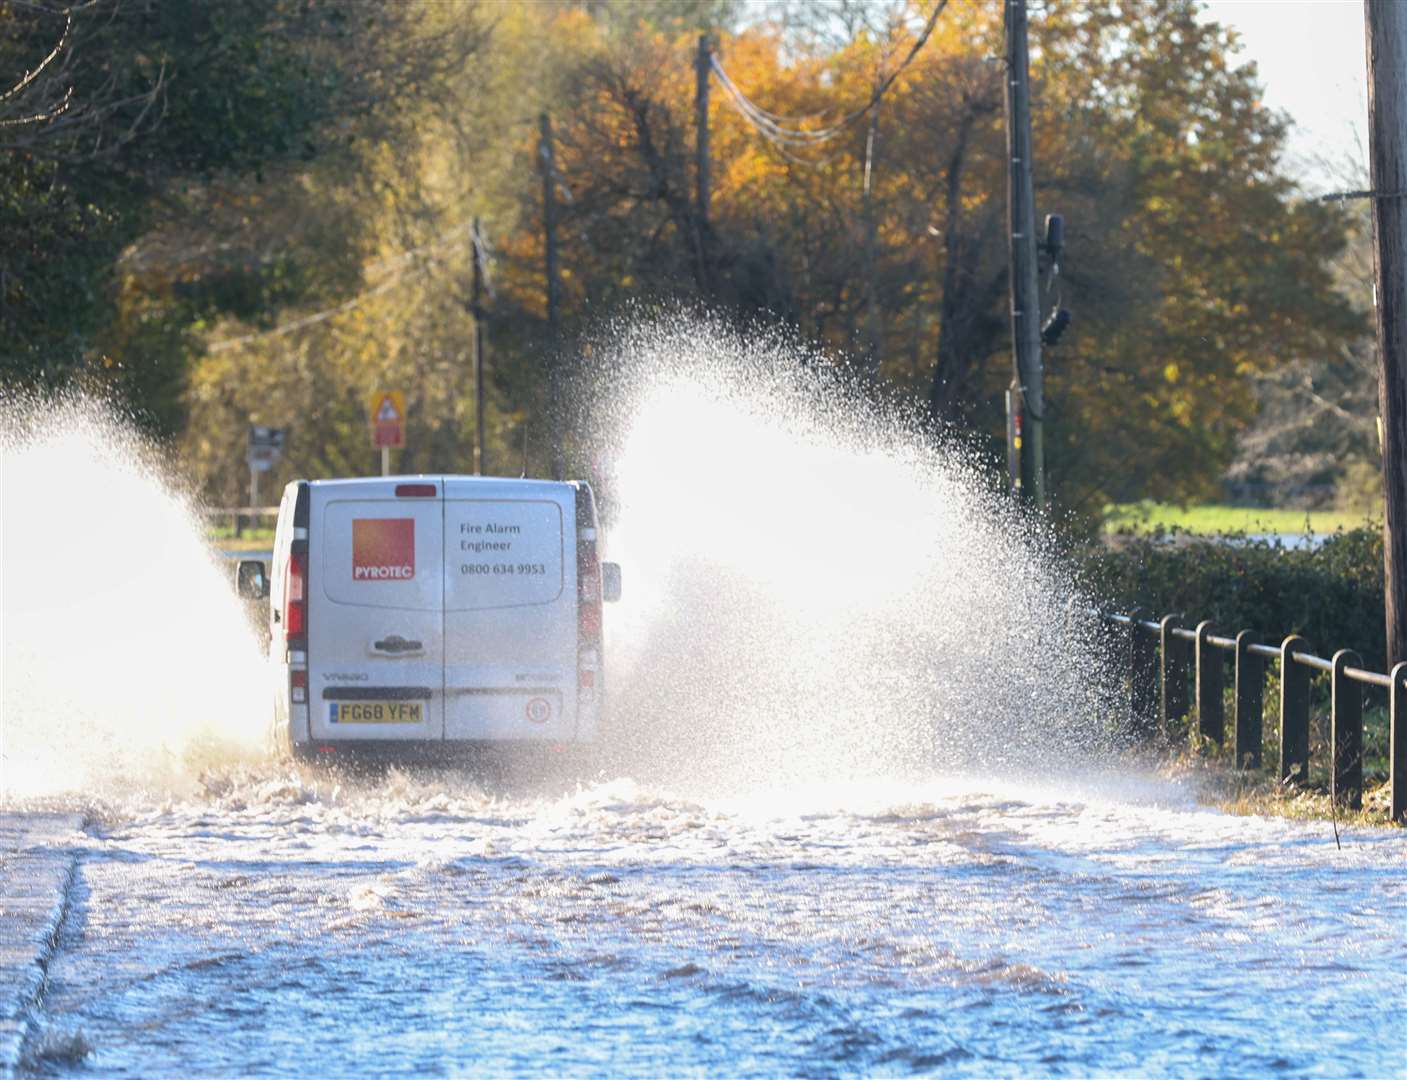 Flooding in Yalding earlier this month Photo: UKNIP